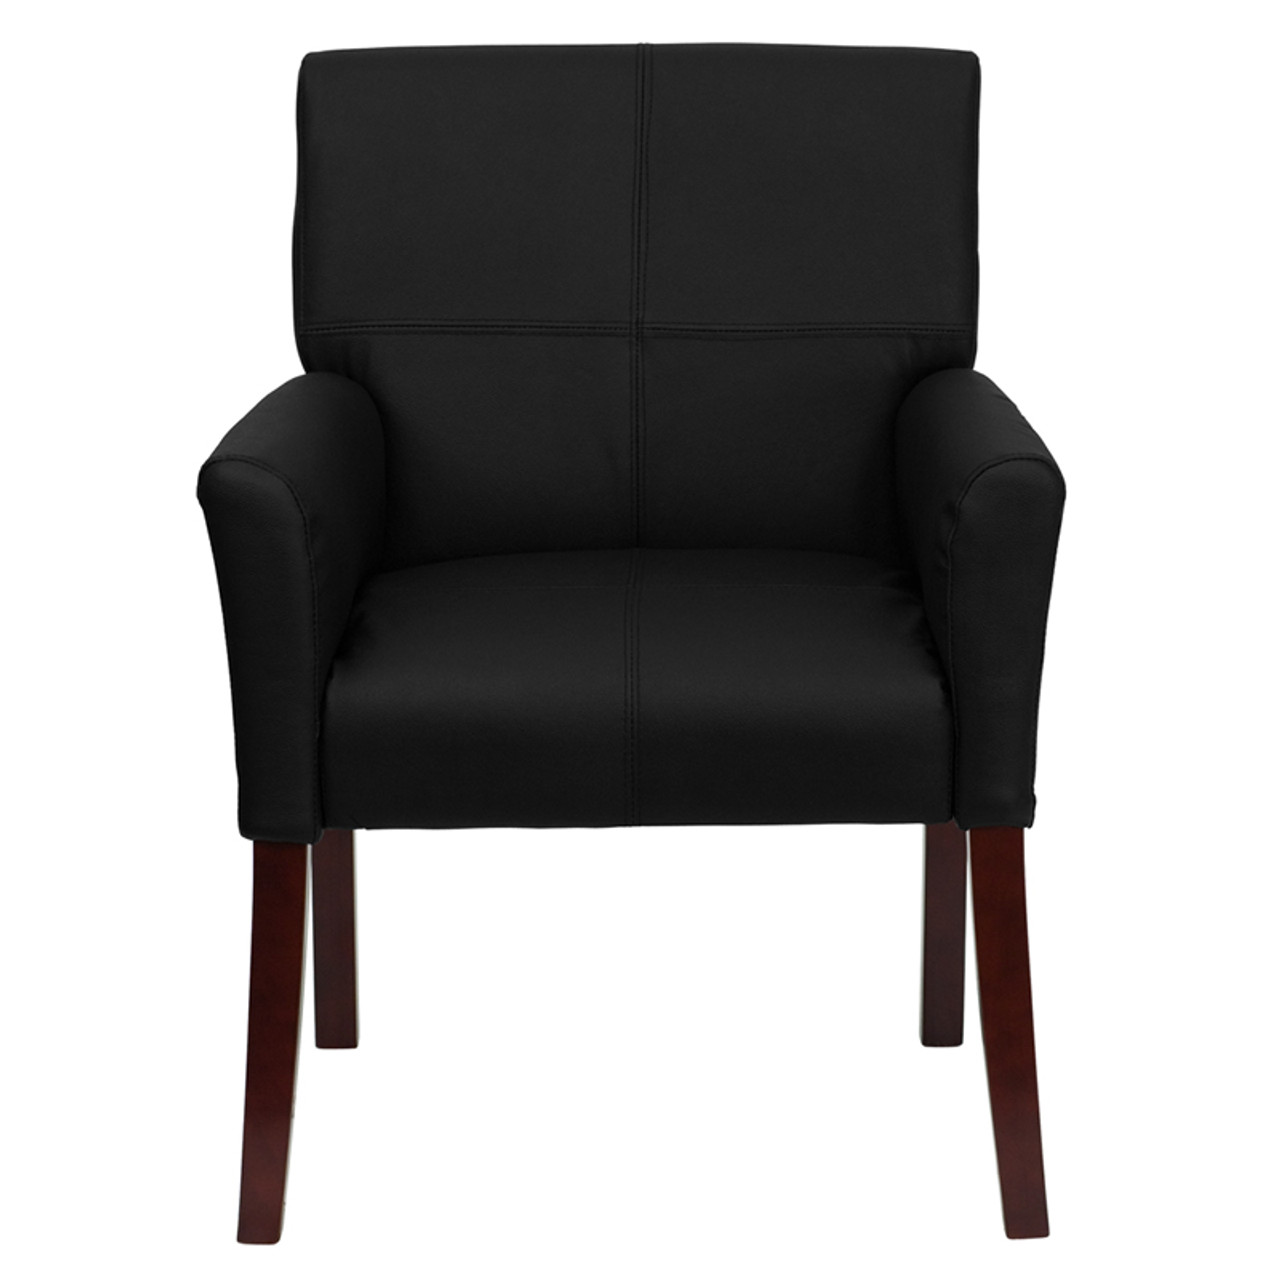 Black Leather Executive Side Chair or Reception Chair with Mahogany Legs , #FF-0451-14